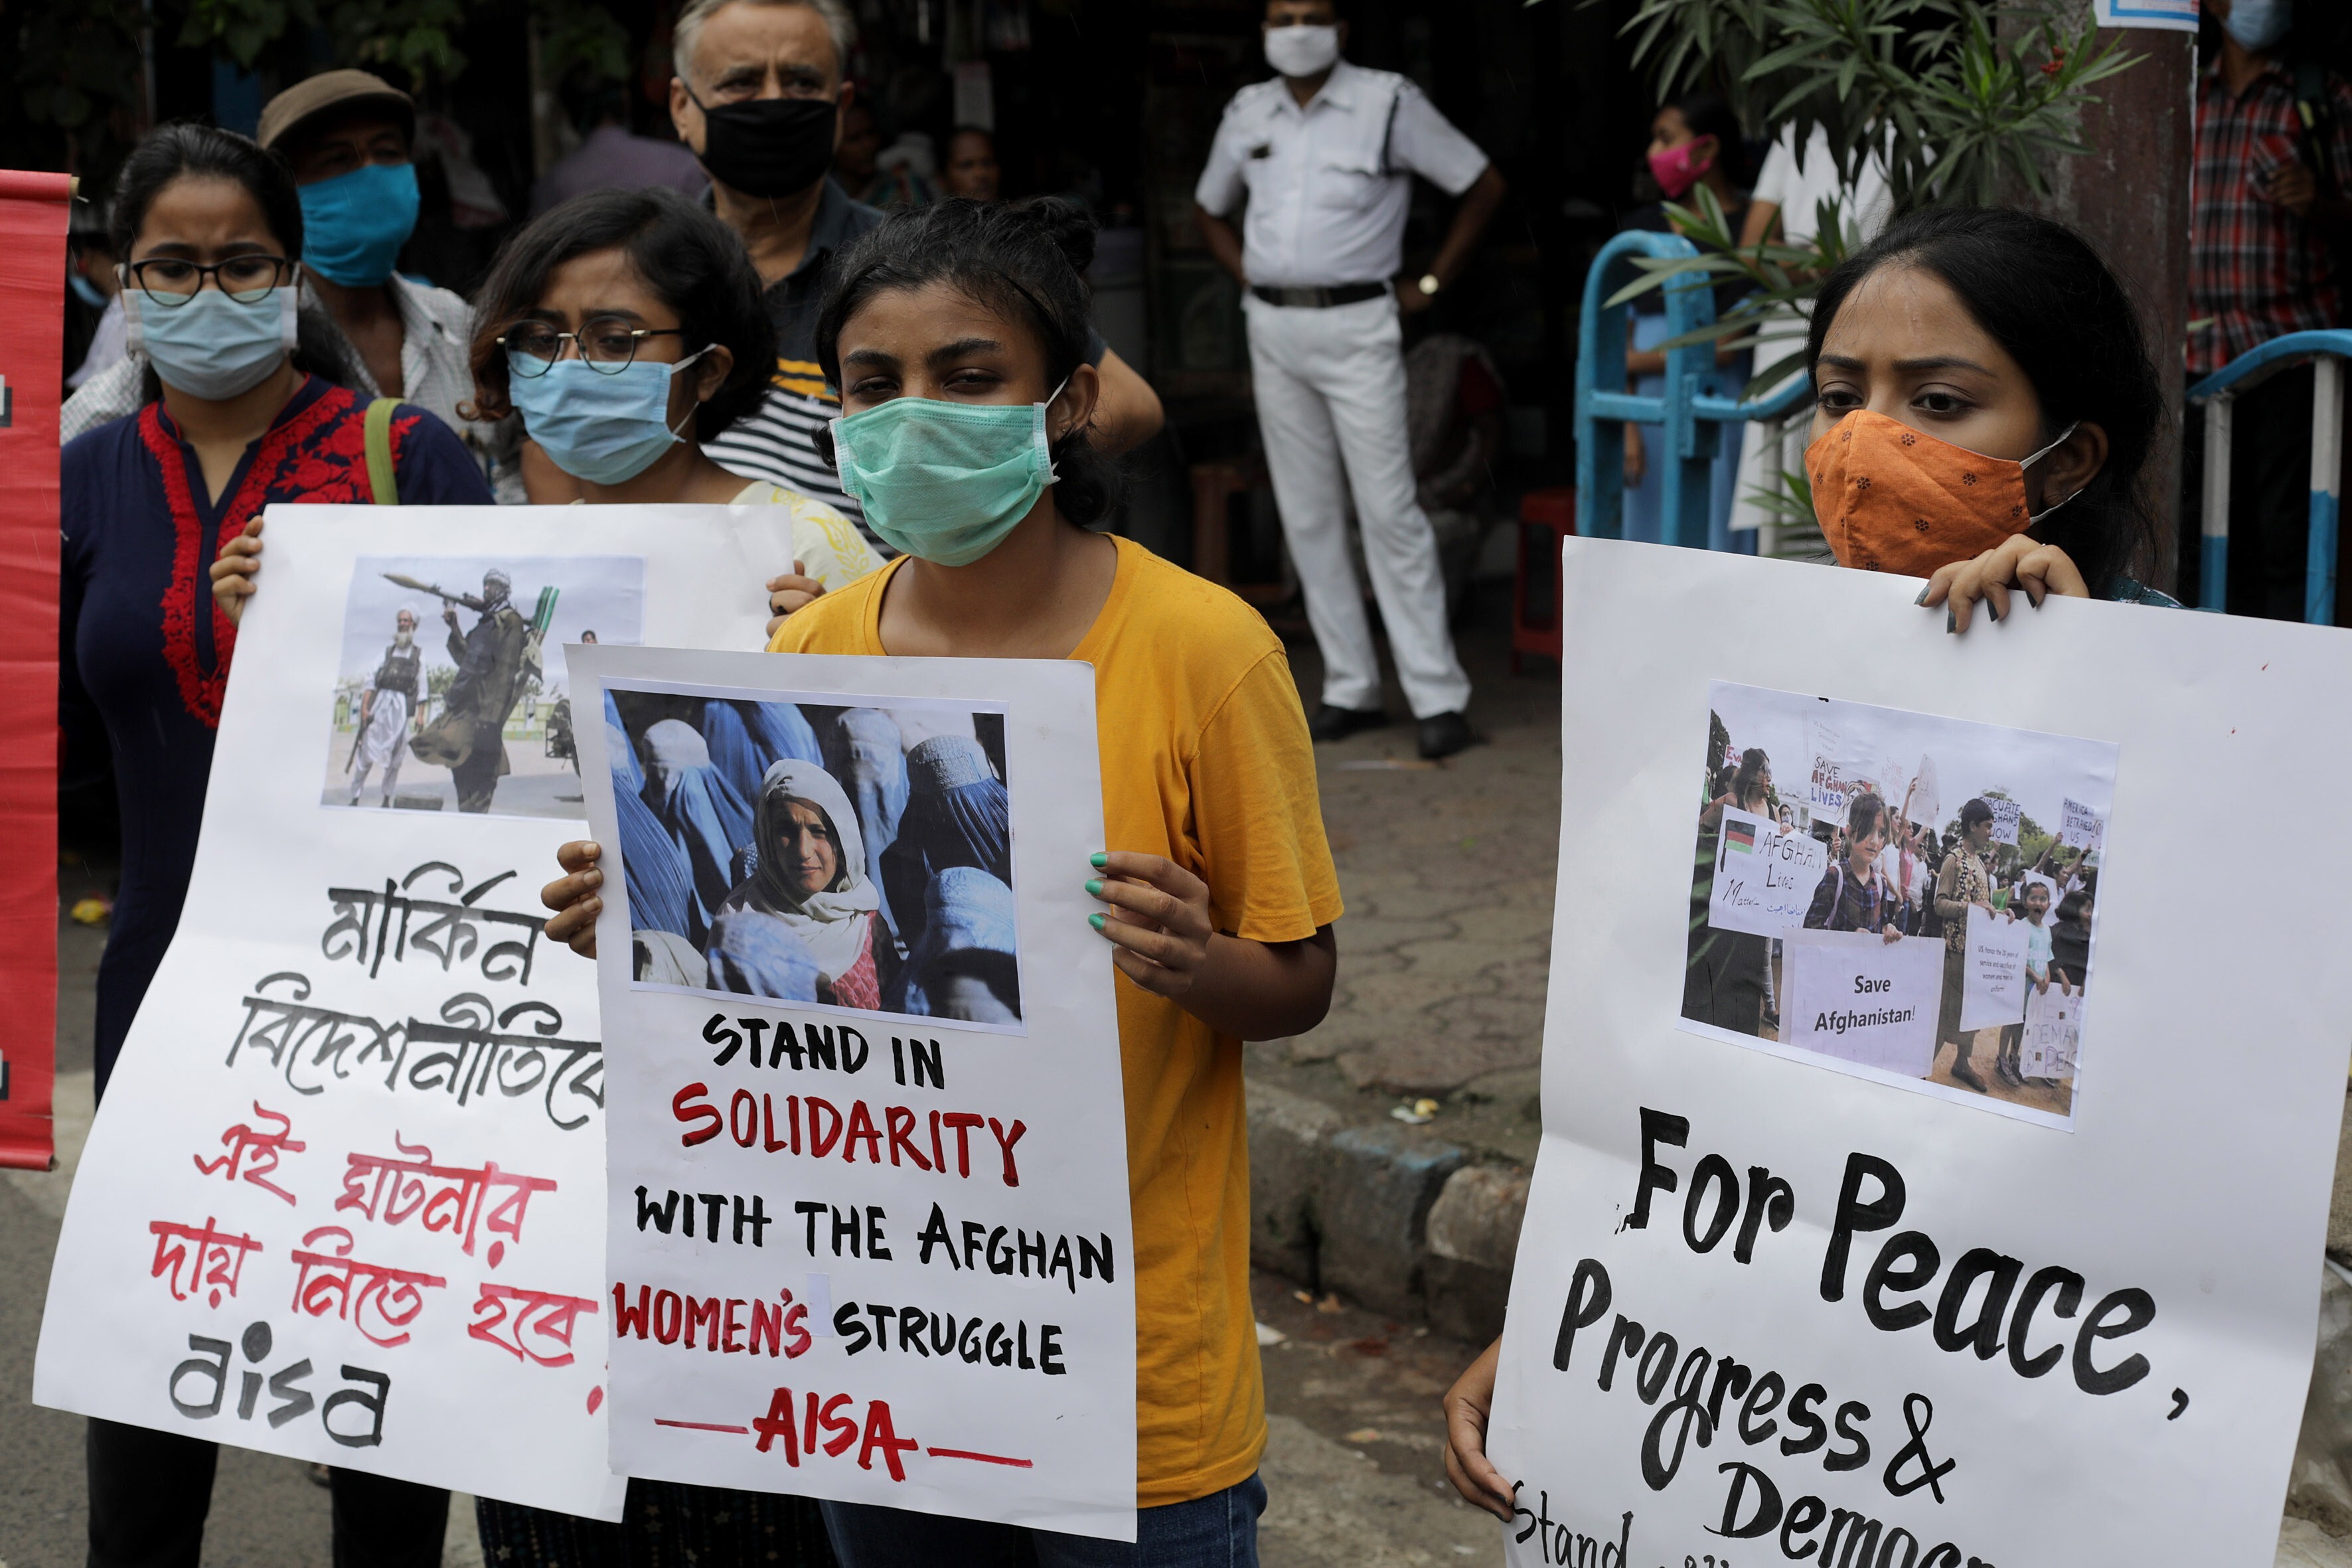 Members of All India Students Association (AISA) take part in a protest in Kolkata in solidarity with the Afghan people after the Taliban takeover of Afghanistan. India is grappling with how to adjust to the shift in regional geopolitics. Photo: EPA-EFE